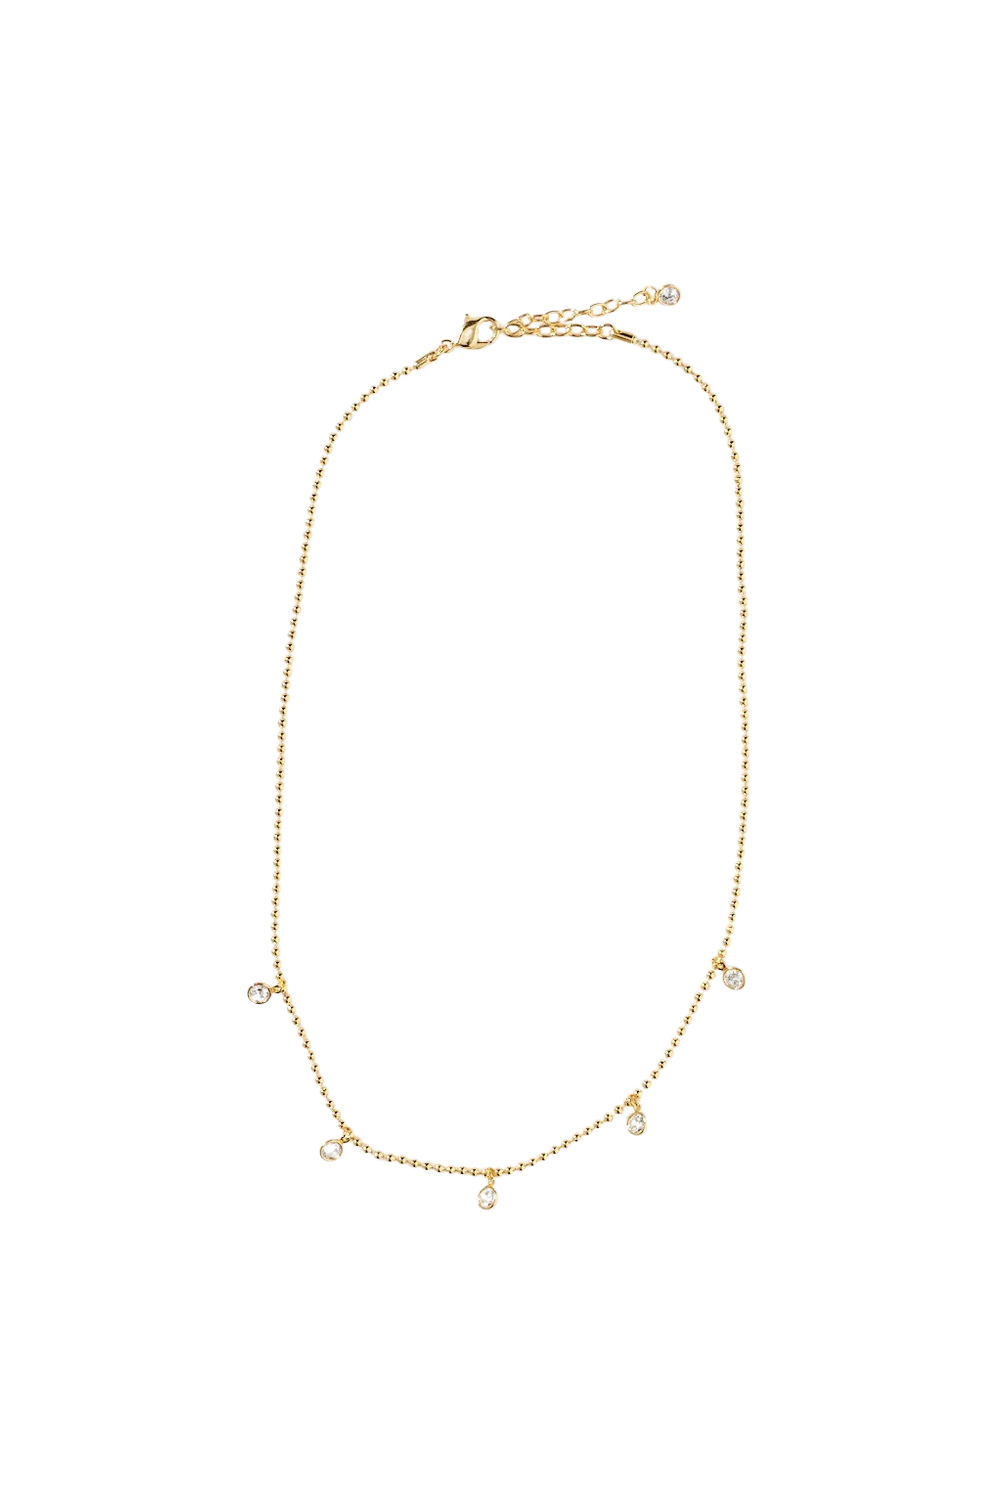 Steph Shaker Necklace - Gold